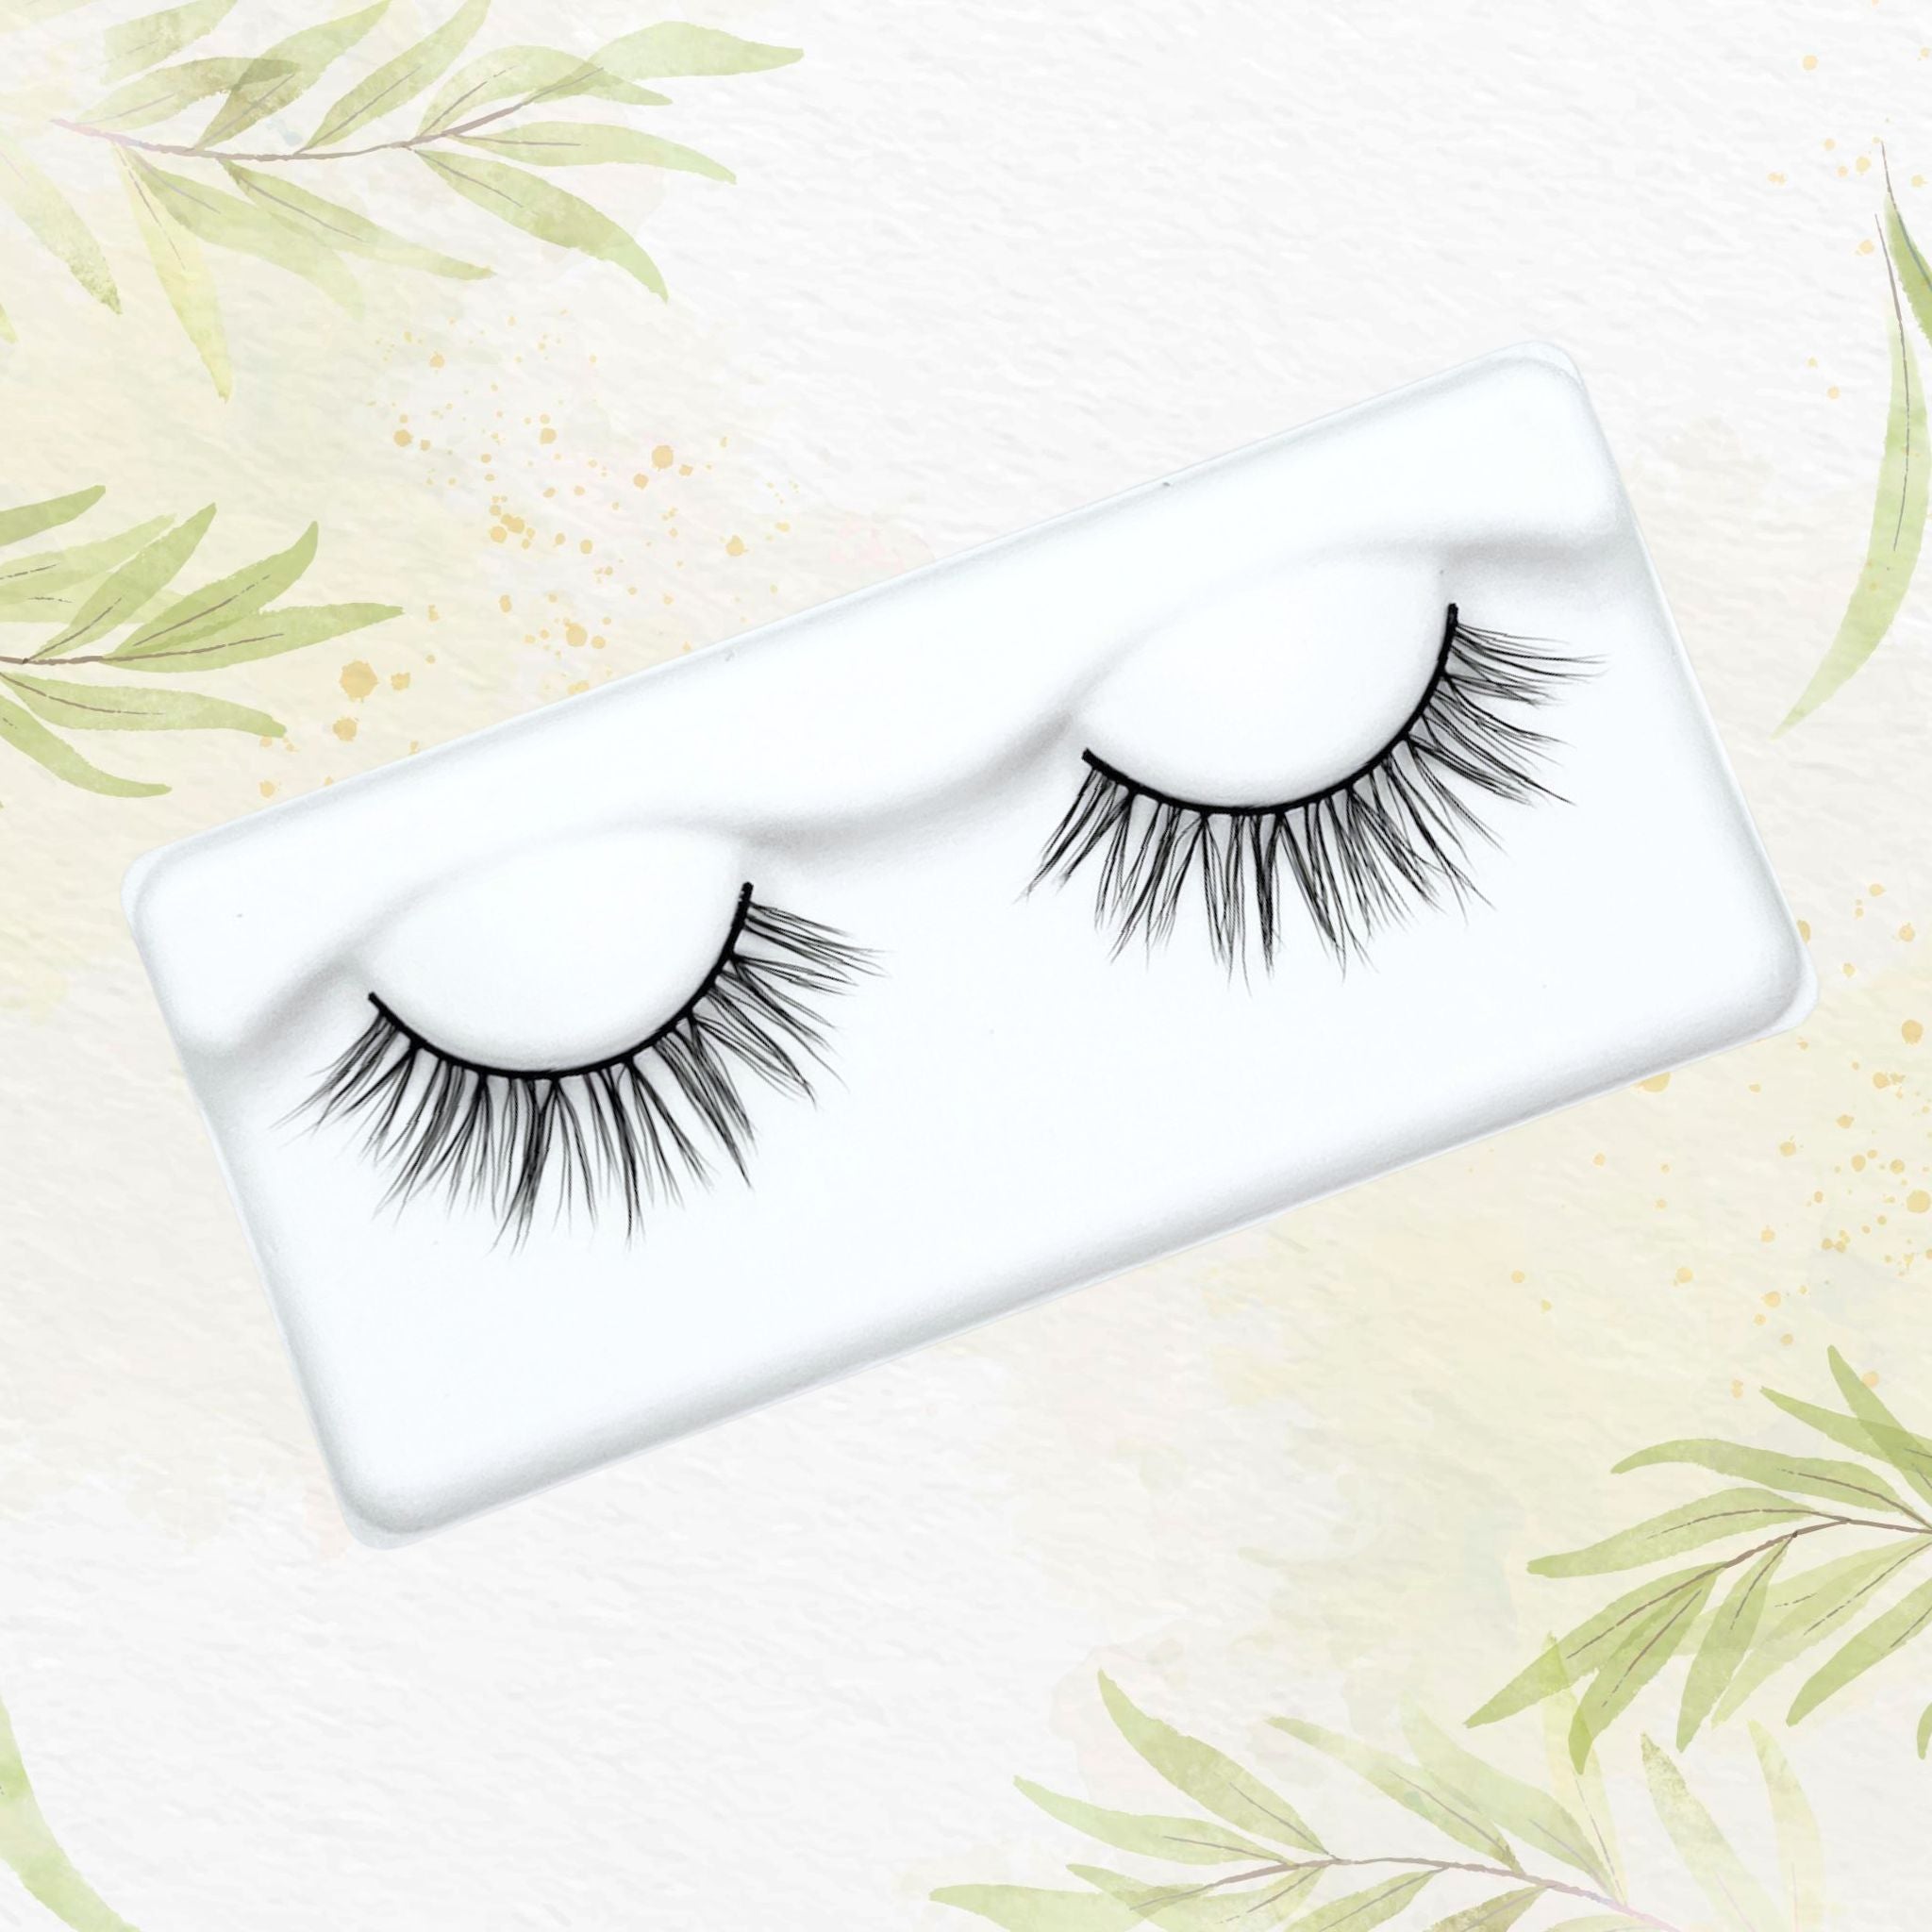 Spikey Cluster Lashes for Everyday Wear